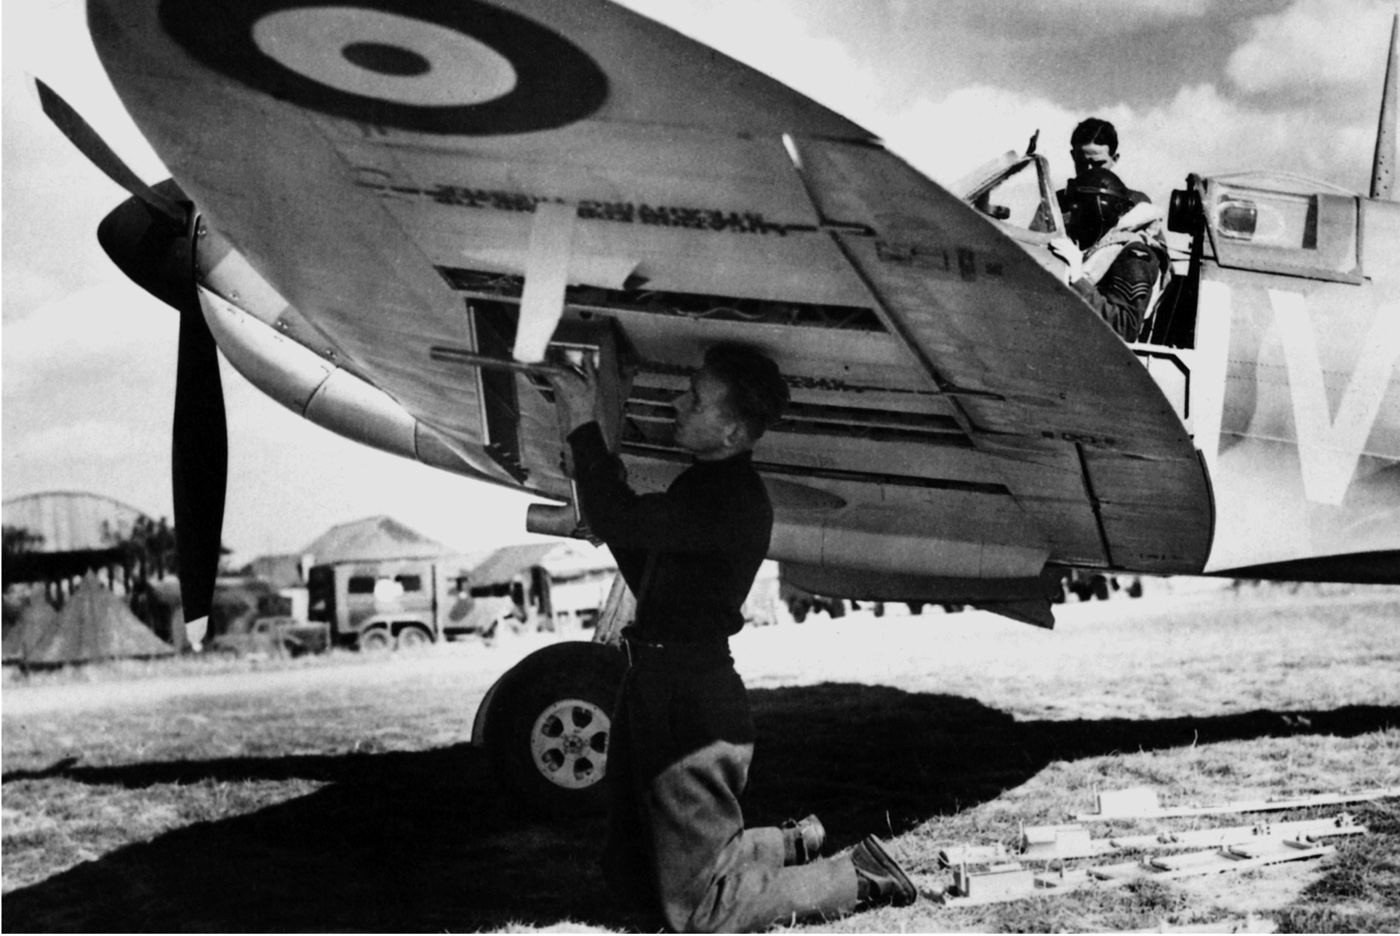 In this photo, a crewman makes adjustments to a Spitfire while reloading ammunition for its guns.